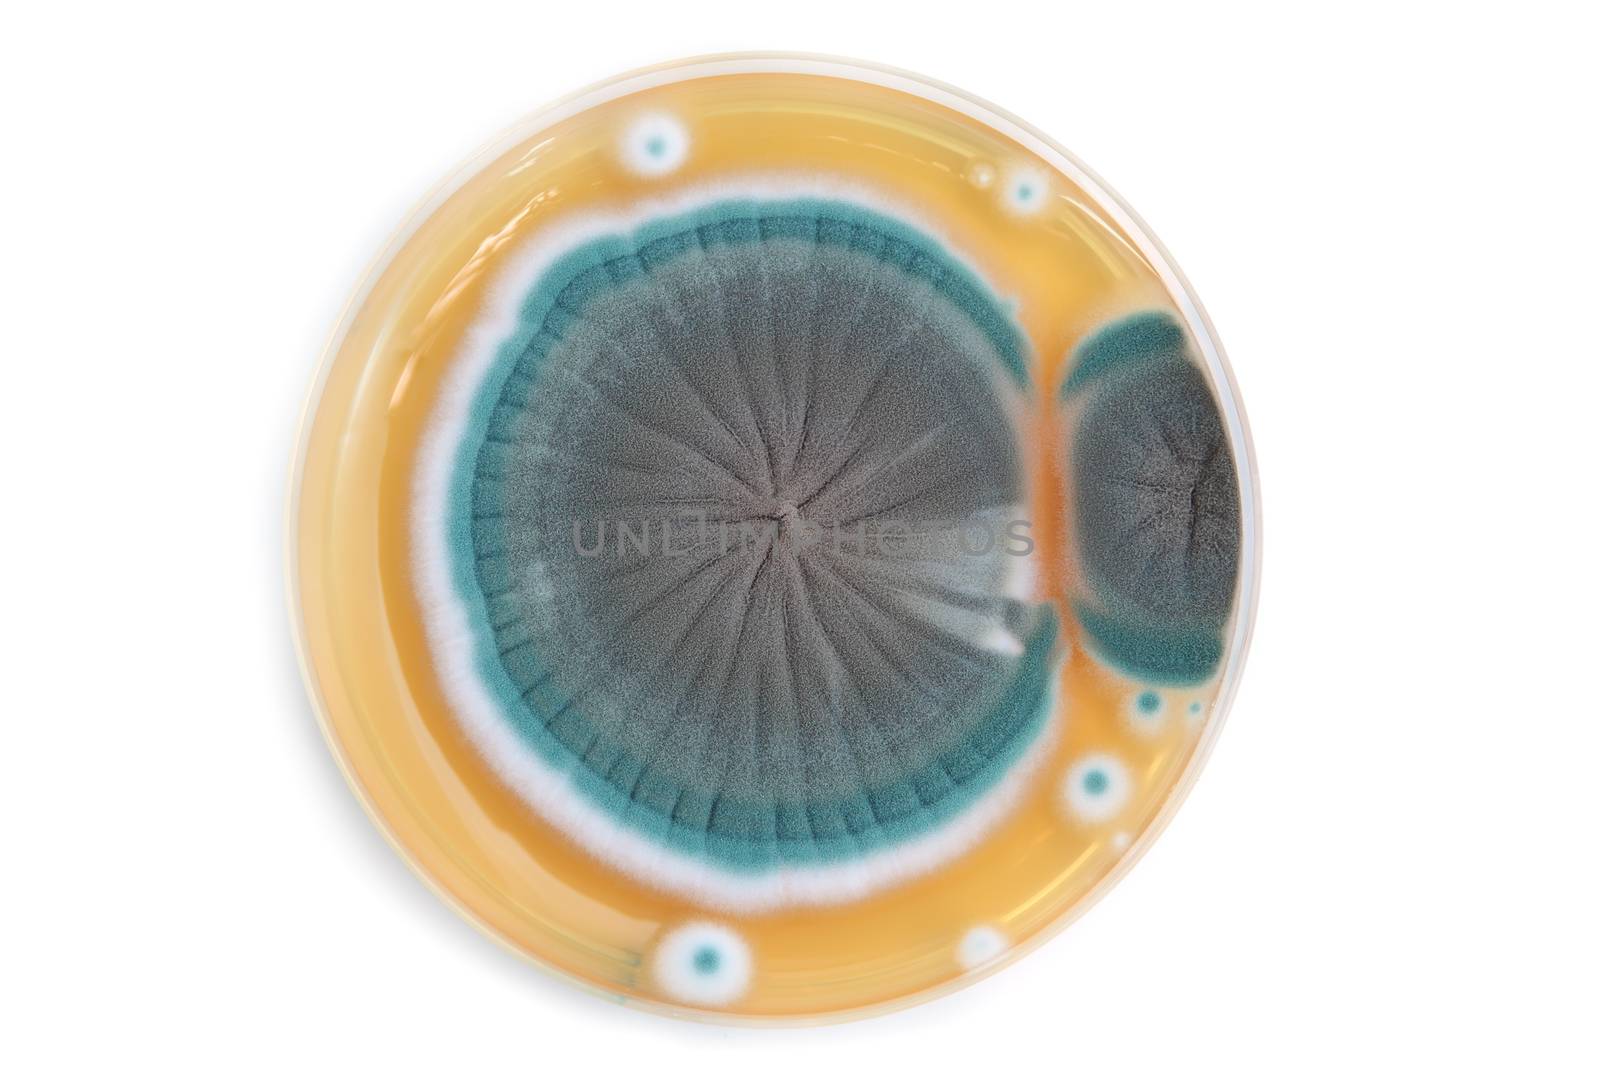 fungi colony on agar plate by catolla